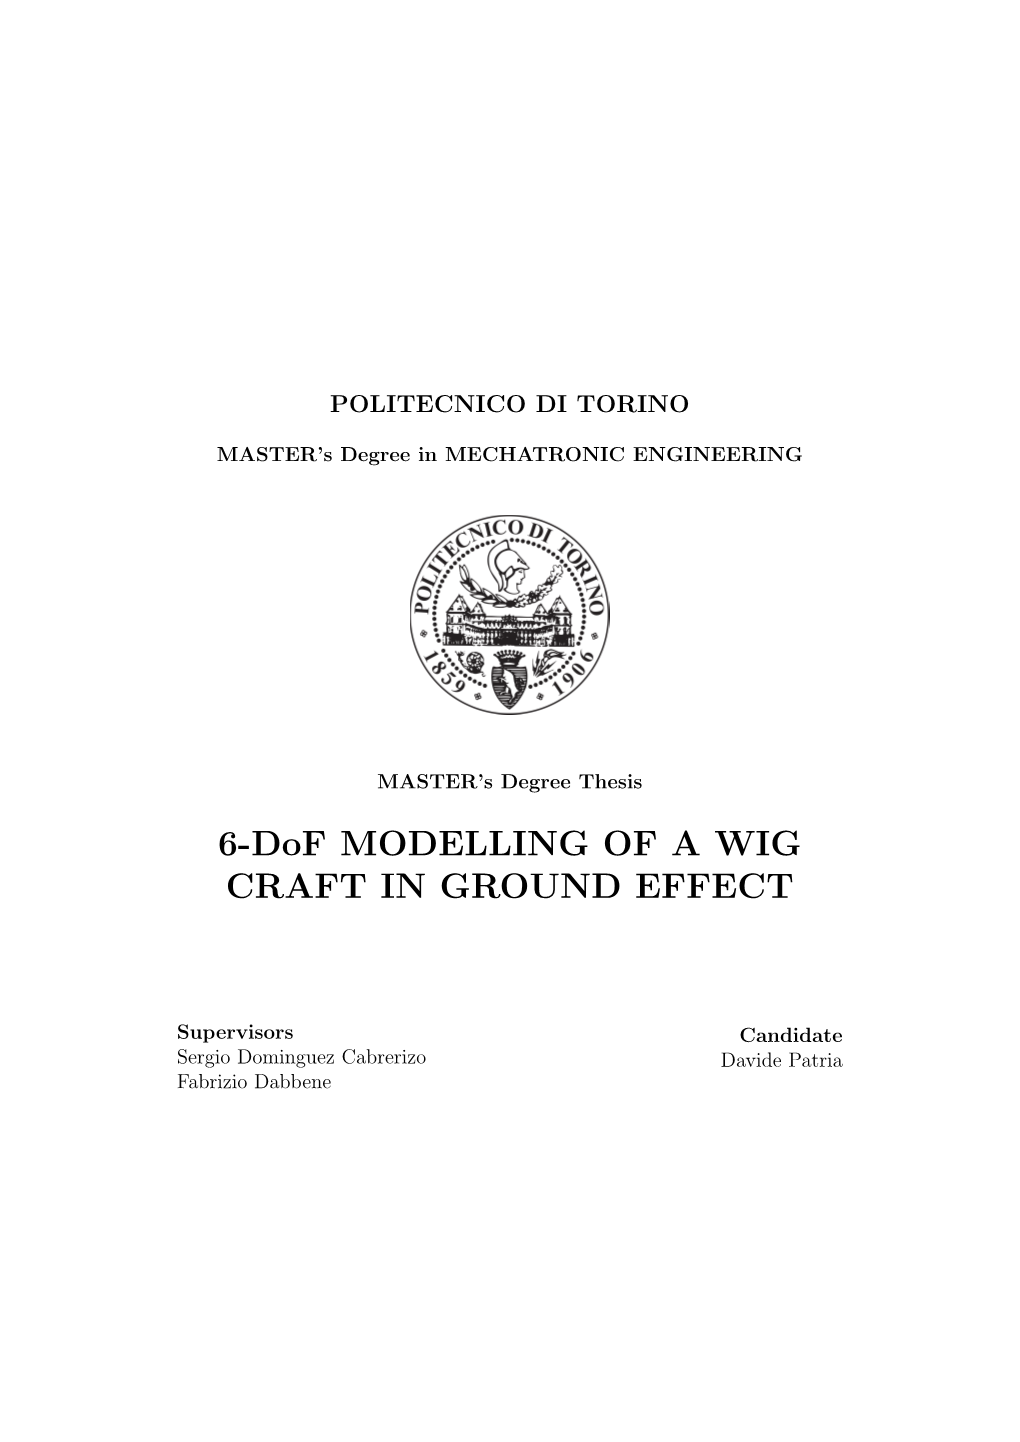 6-Dof MODELLING of a WIG CRAFT in GROUND EFFECT